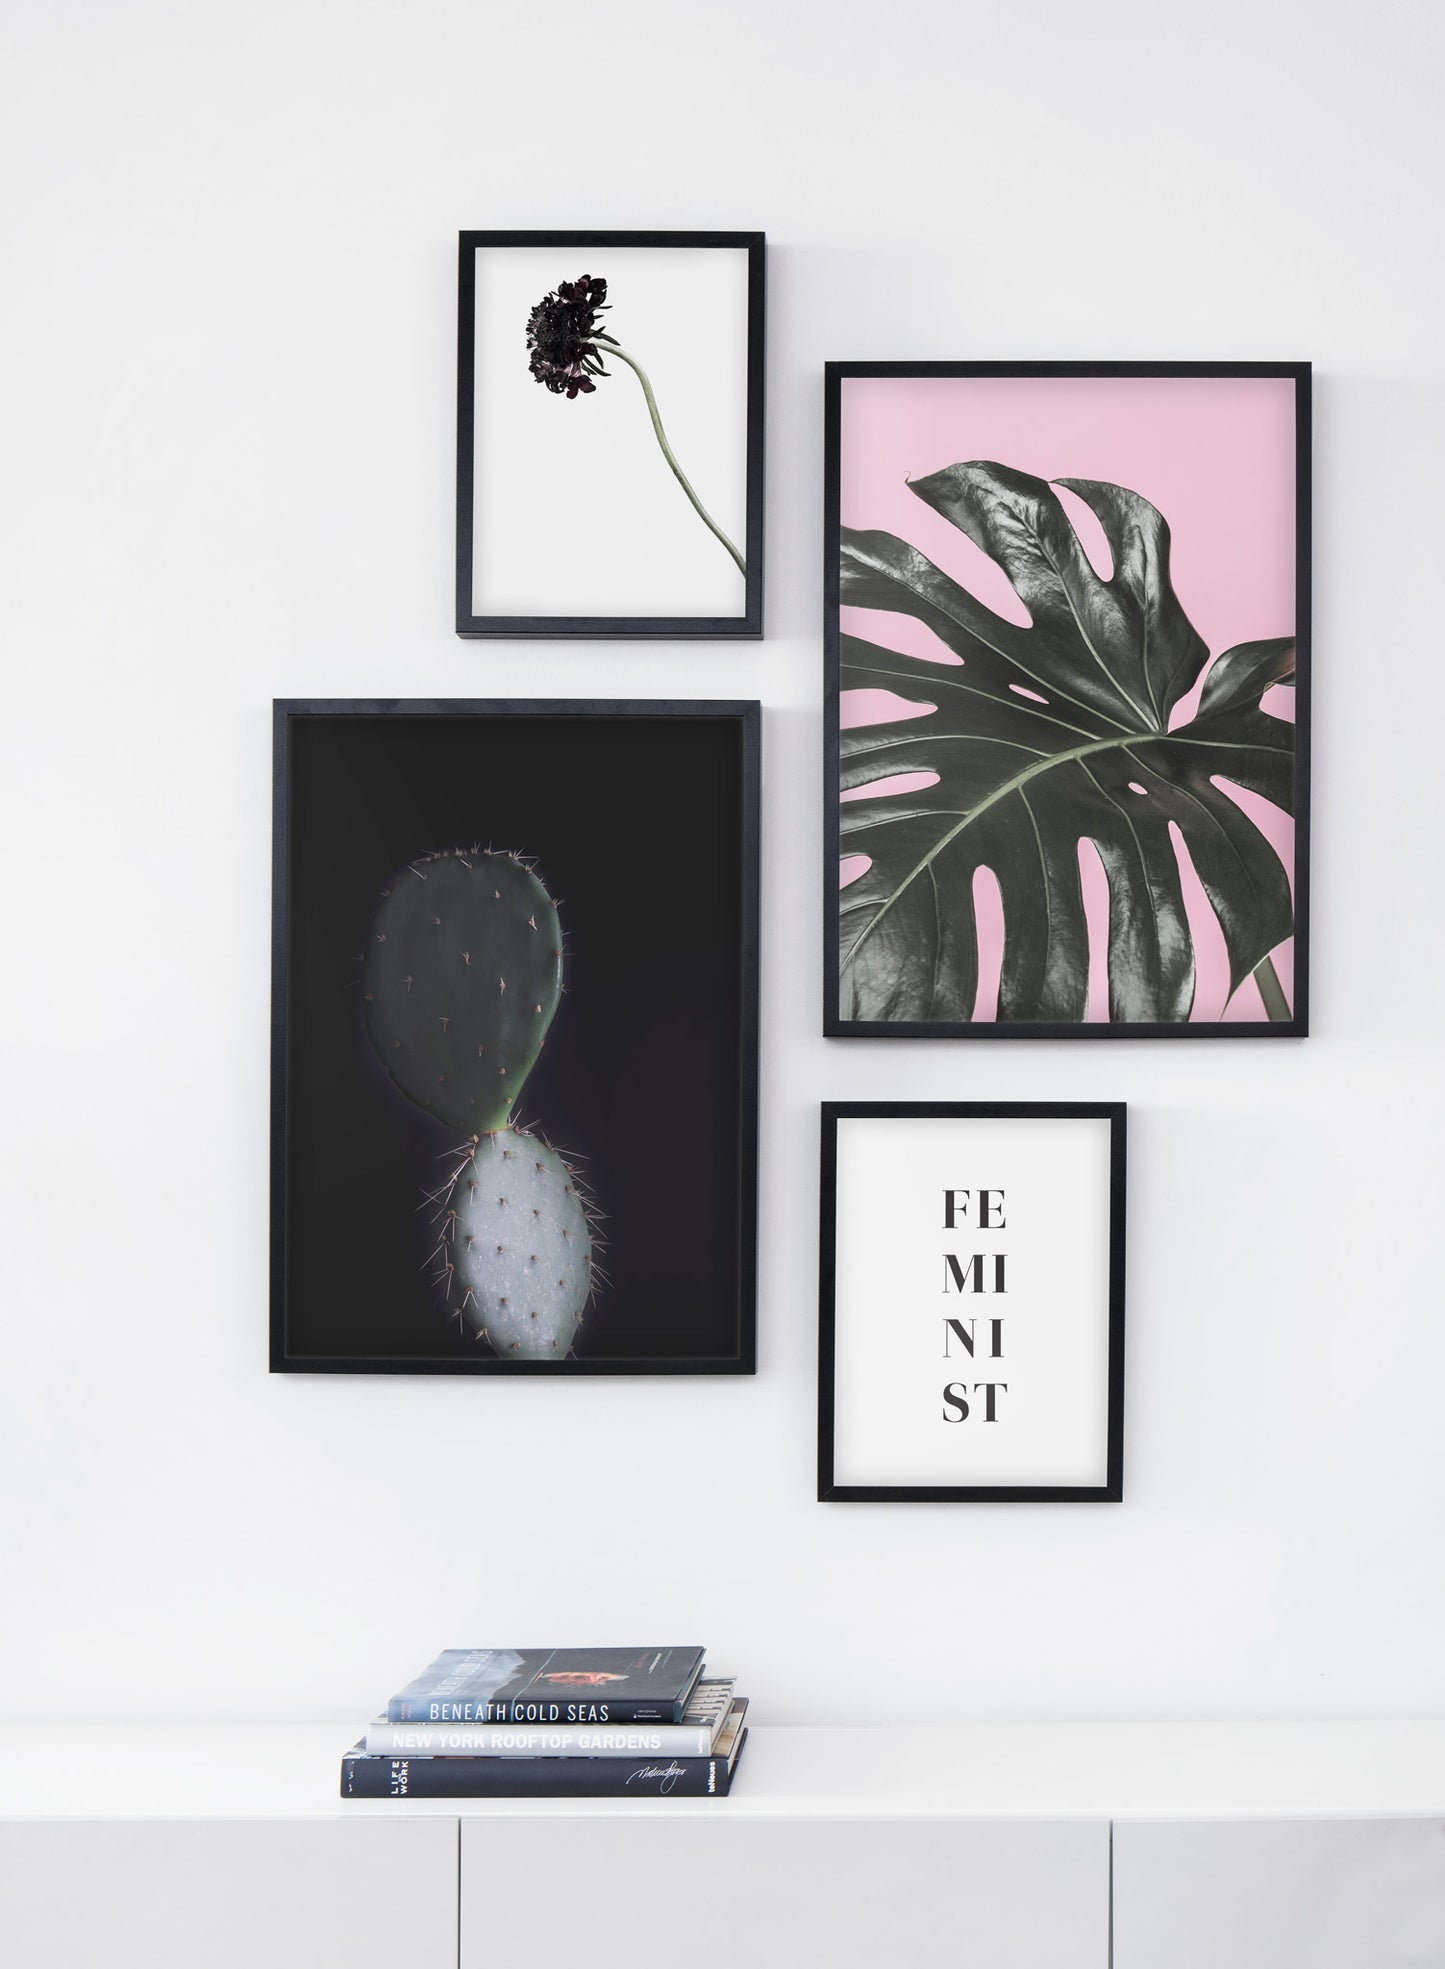 Scandinavian poster by Opposite Wall with cactus art photo design on black bacground - Reflection - Living room bookshelf